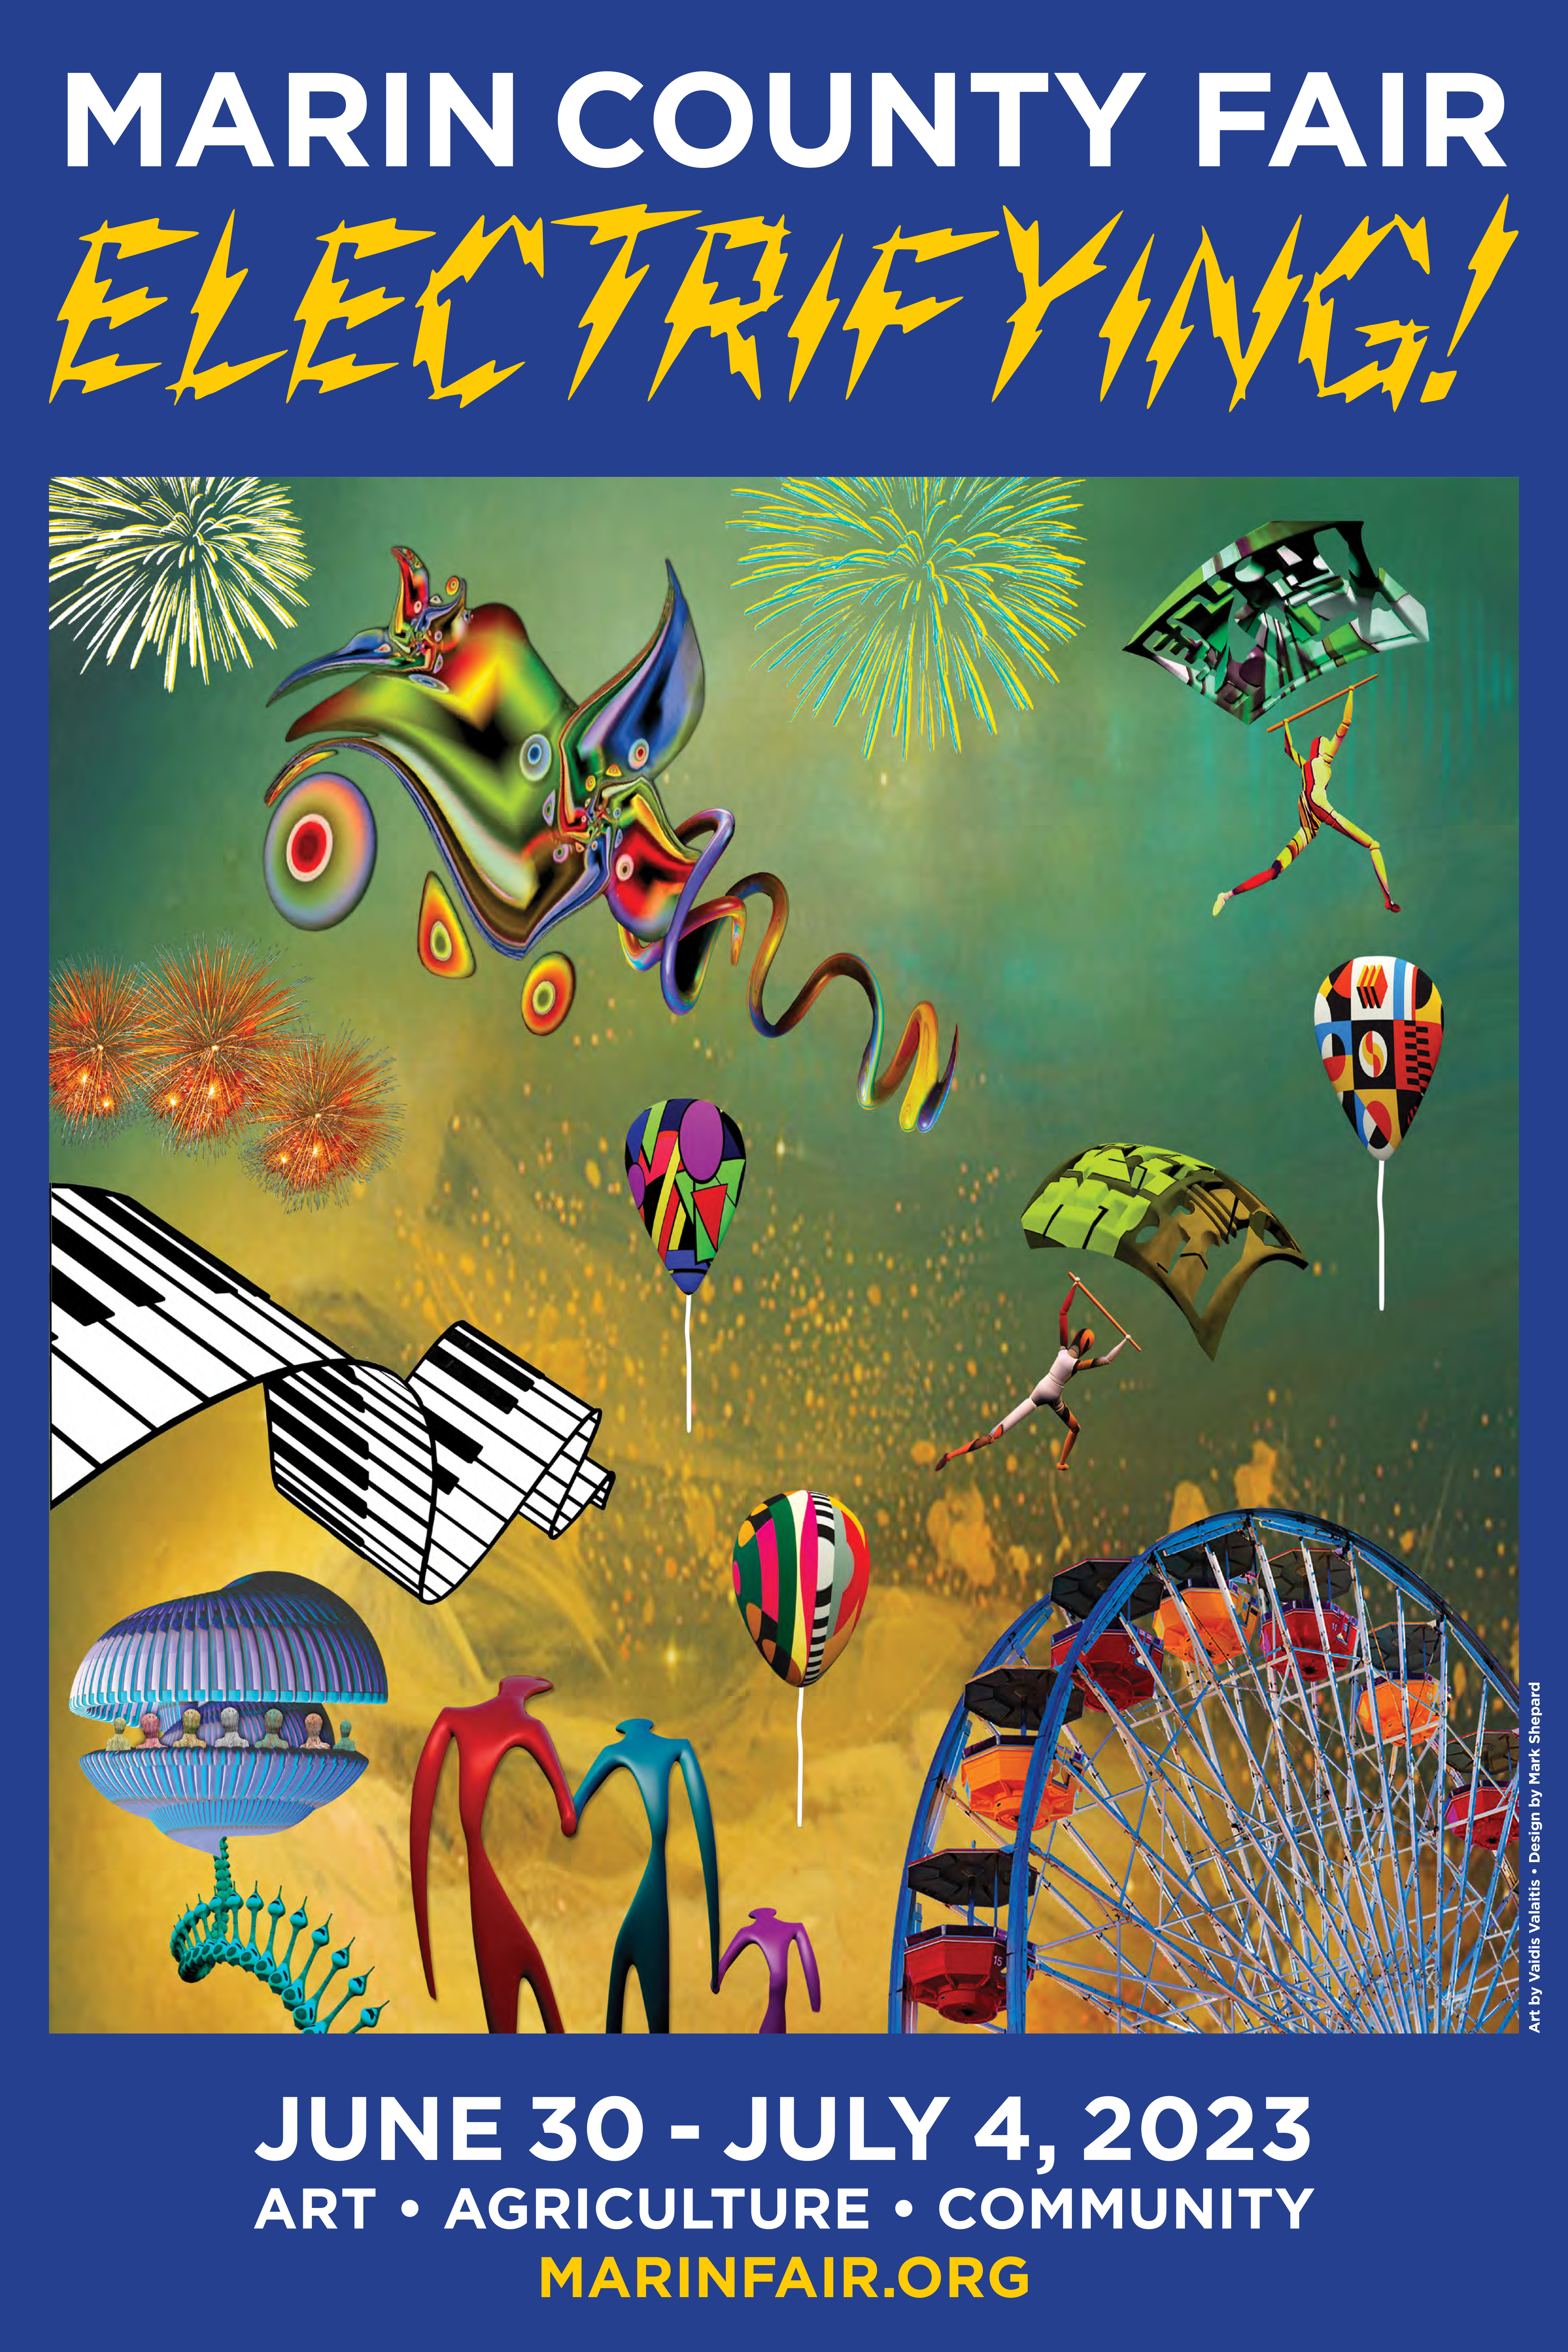 Full size 2023 Marin County Fair promotional artistic poster.